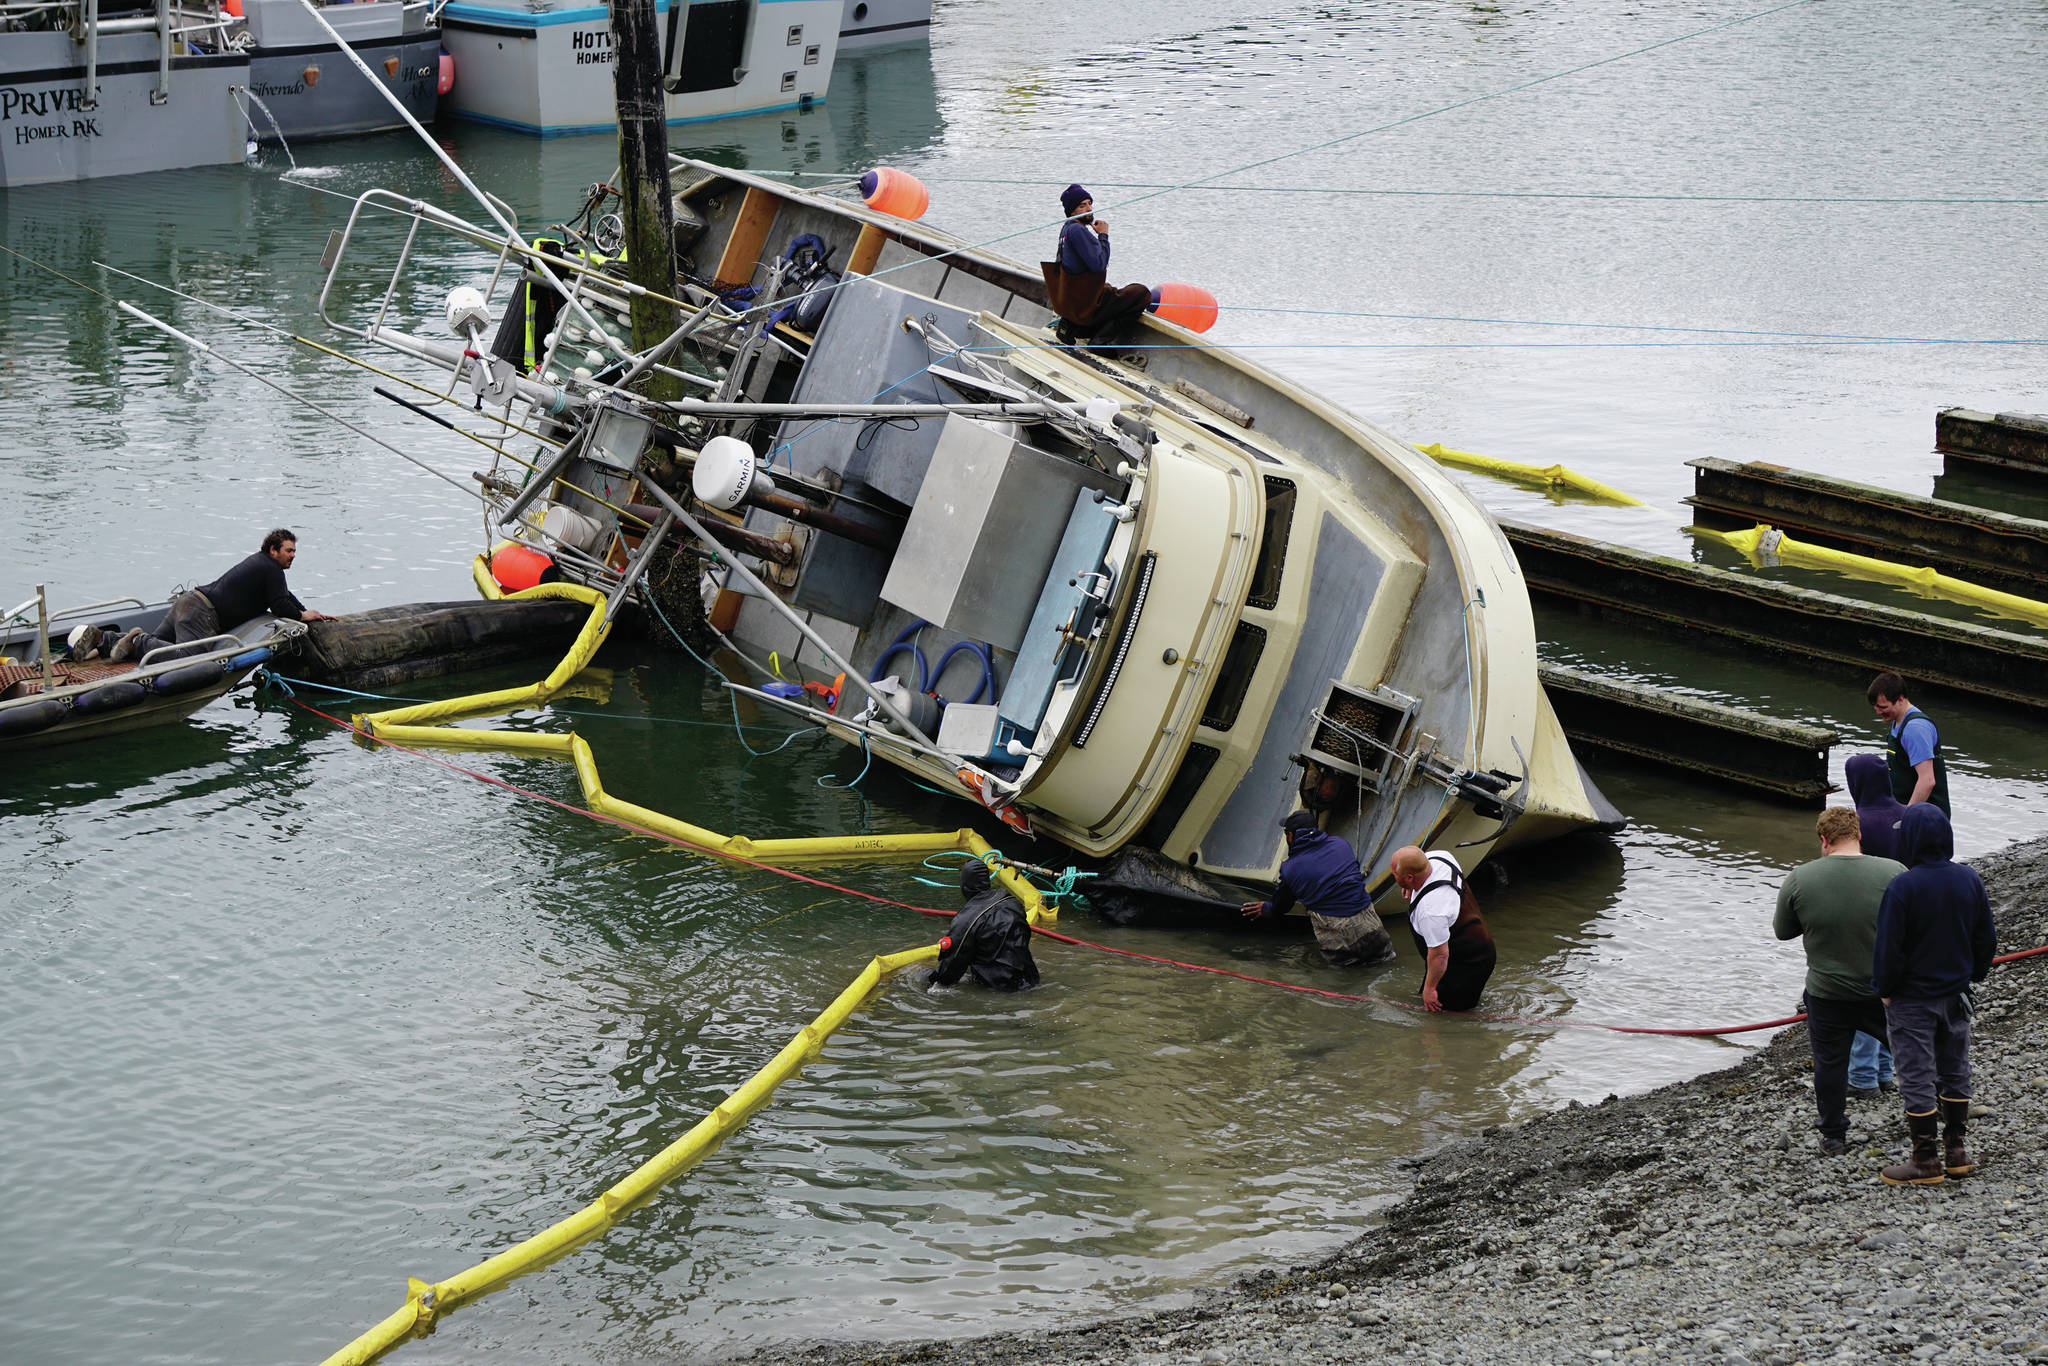 Workers respond to a fishing boat, the F/V Redoubt, that ran aground on the wooden grid on Wednesday, June 2, 2021, in the Homer Harbor in Homer, Alaska. The boat heeled over as the tide went out. (Photo by Michael Armstrong/Homer News)